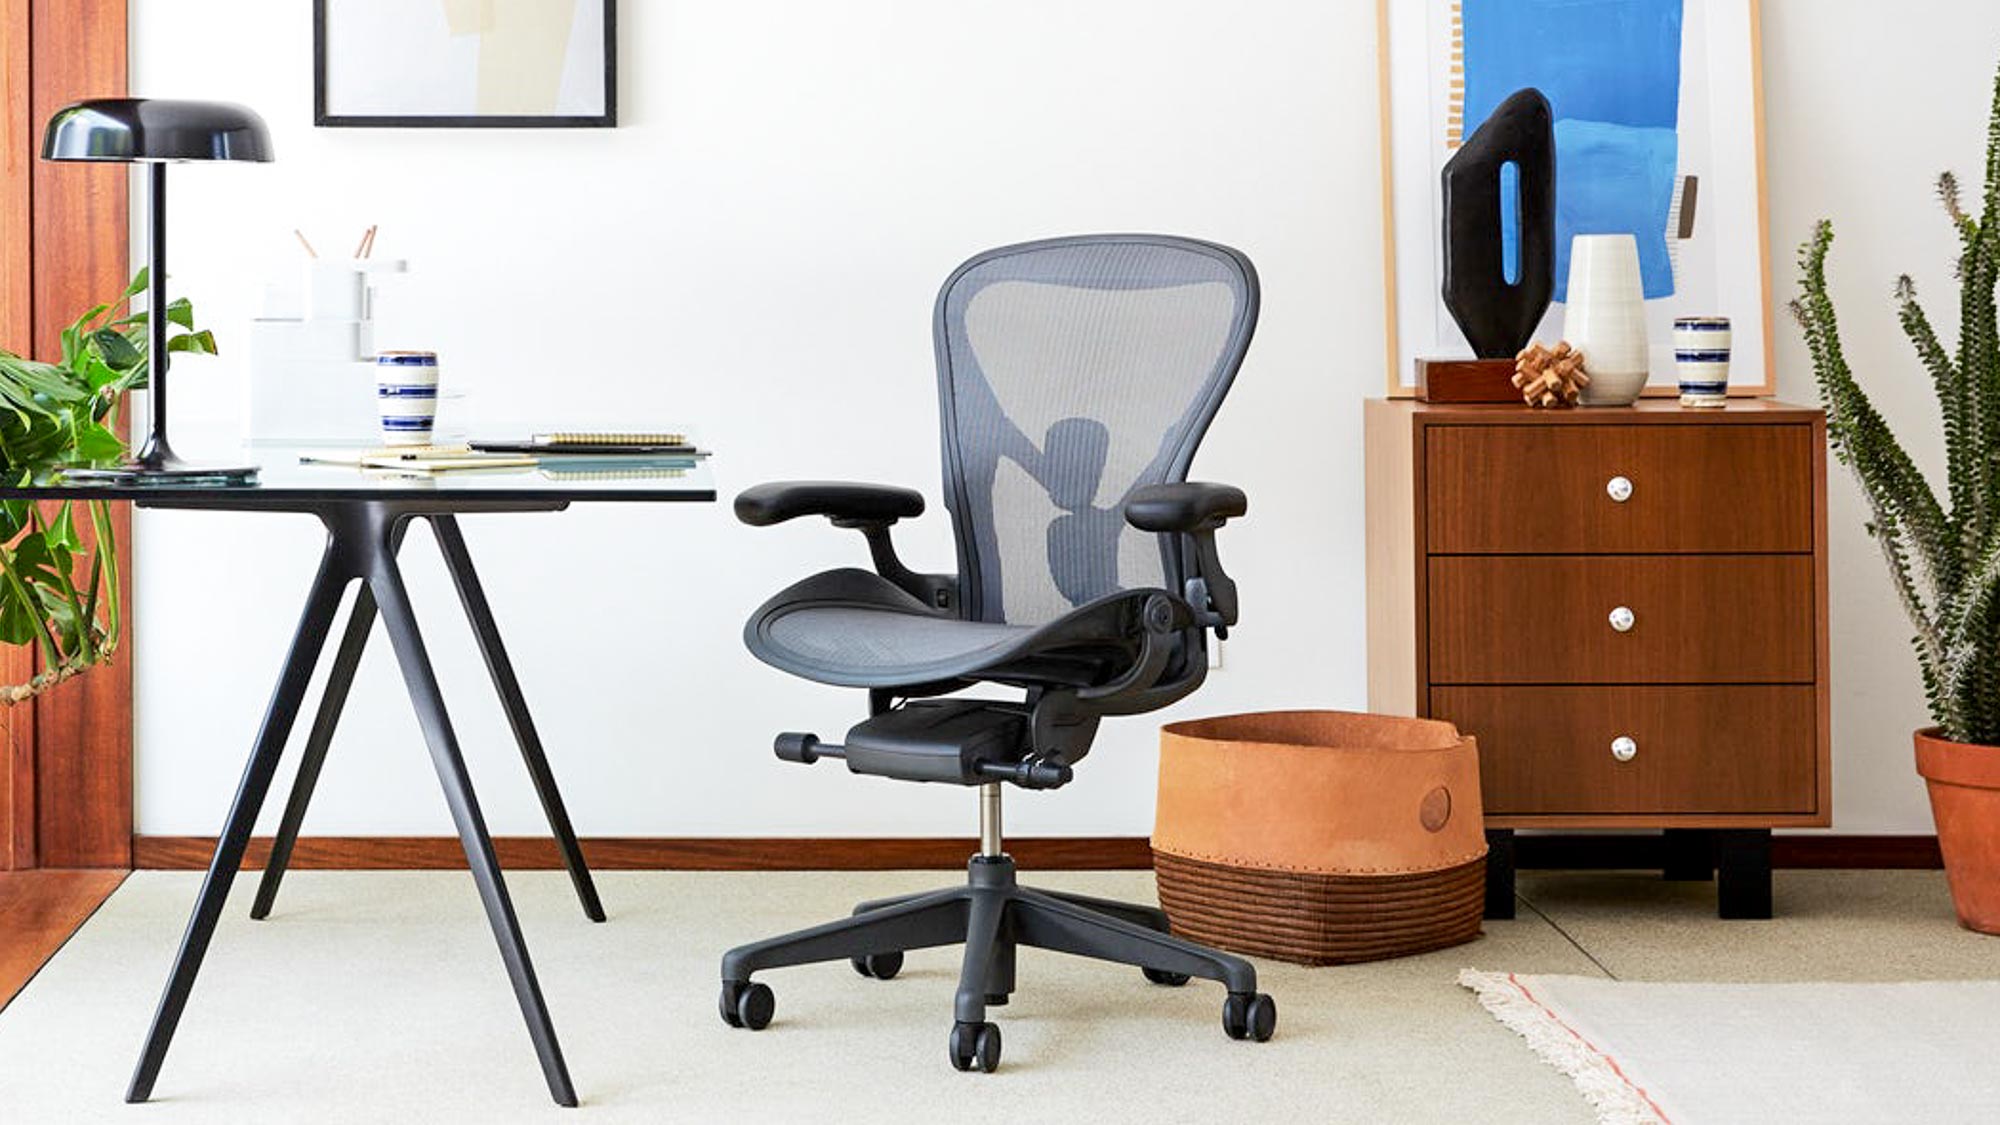 Herman Miller Aeron chair review | Tom's Guide